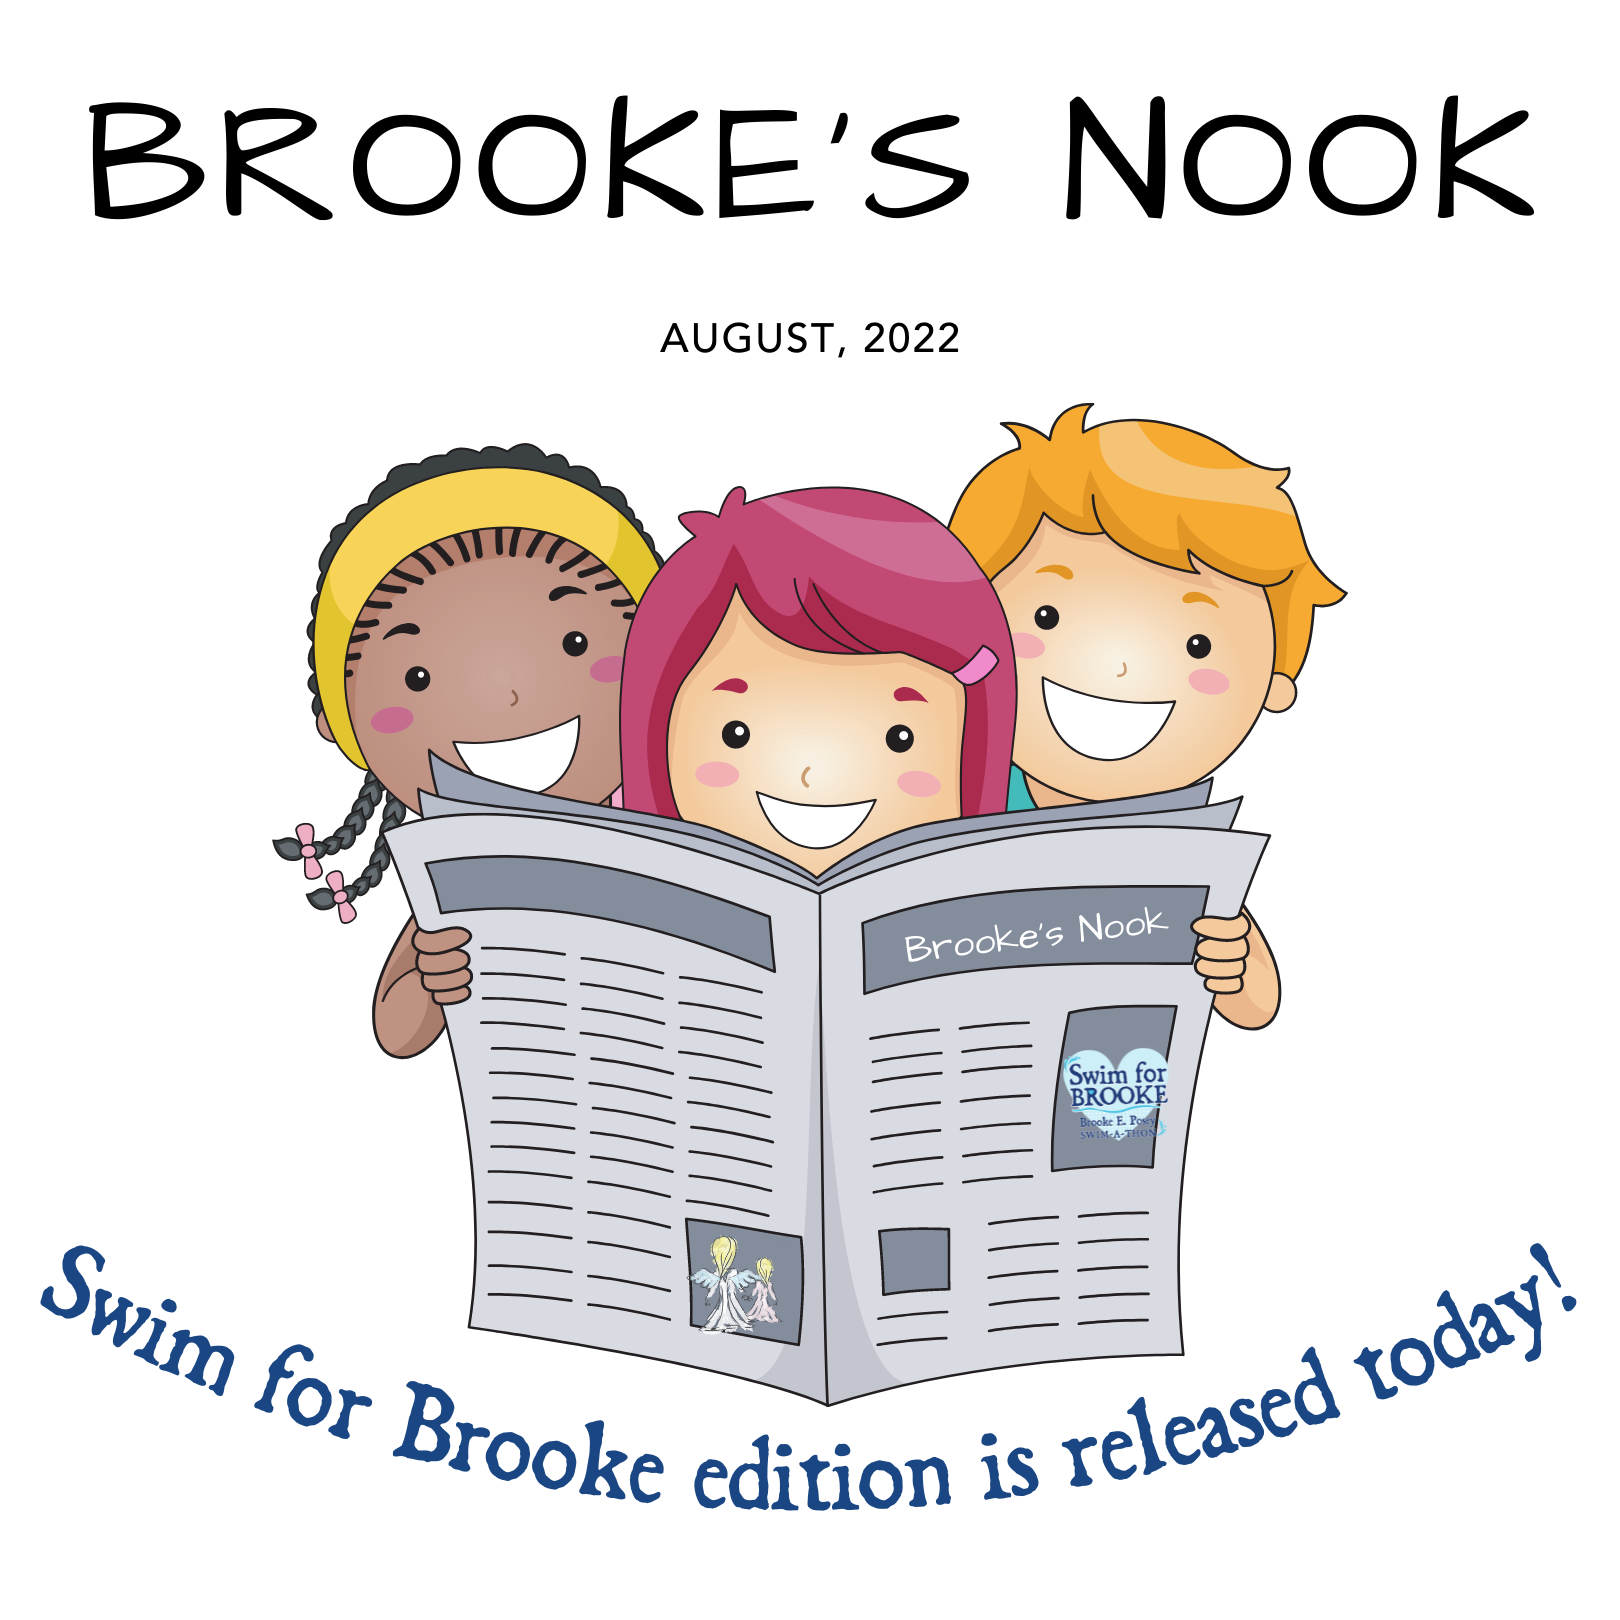 Swim for Brooke edition is out today!